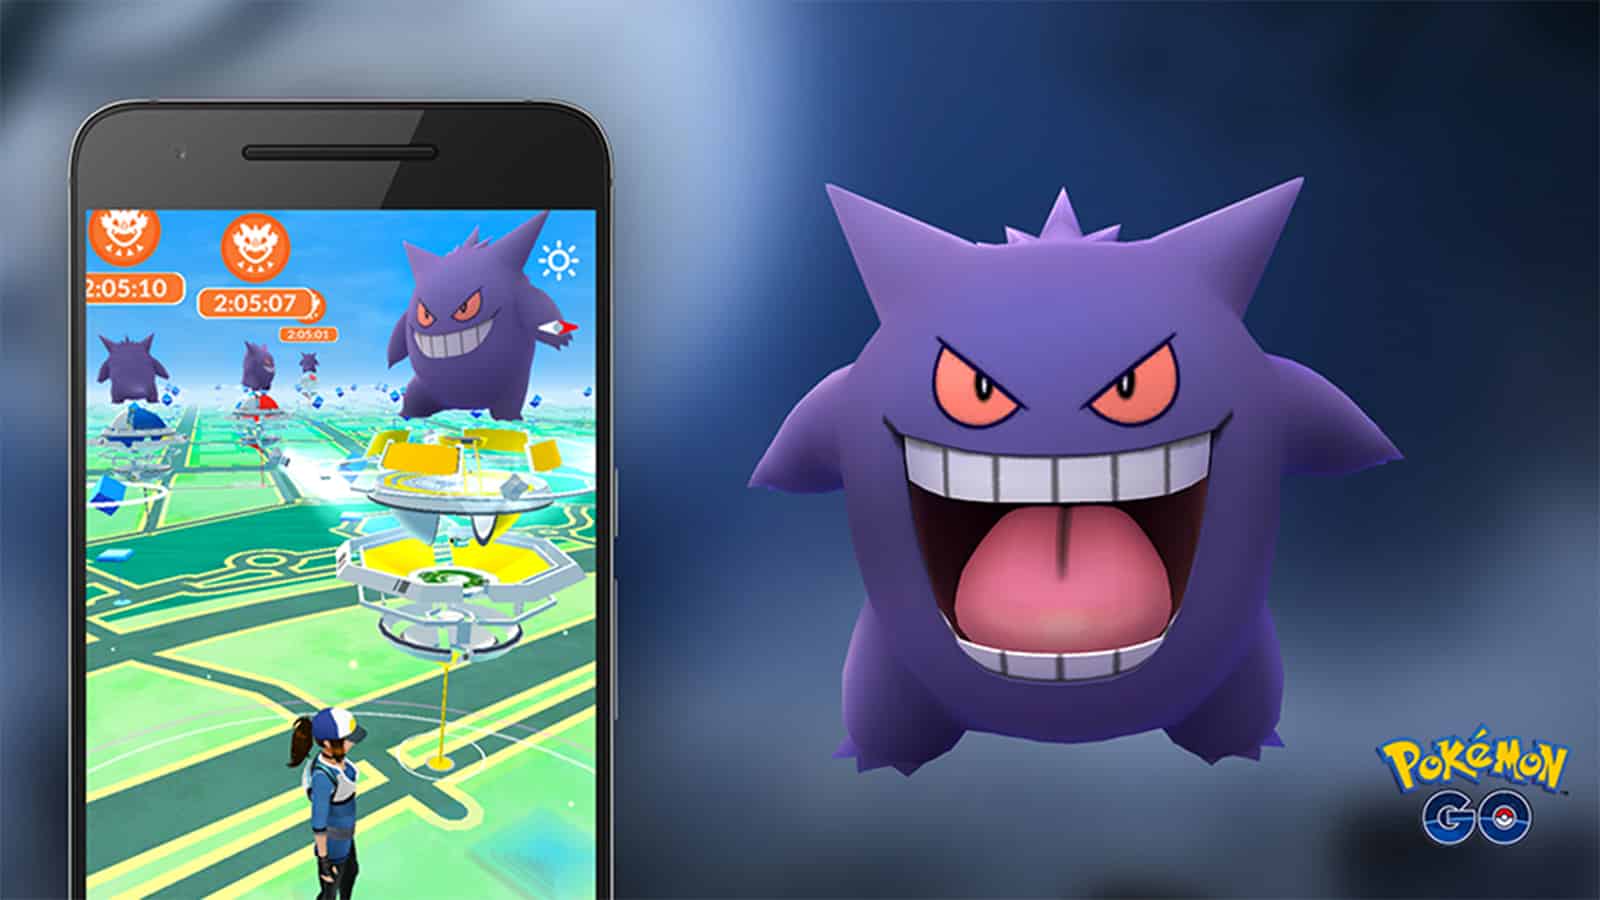 Gengar next to a mobile phone with Pokemon GO on it